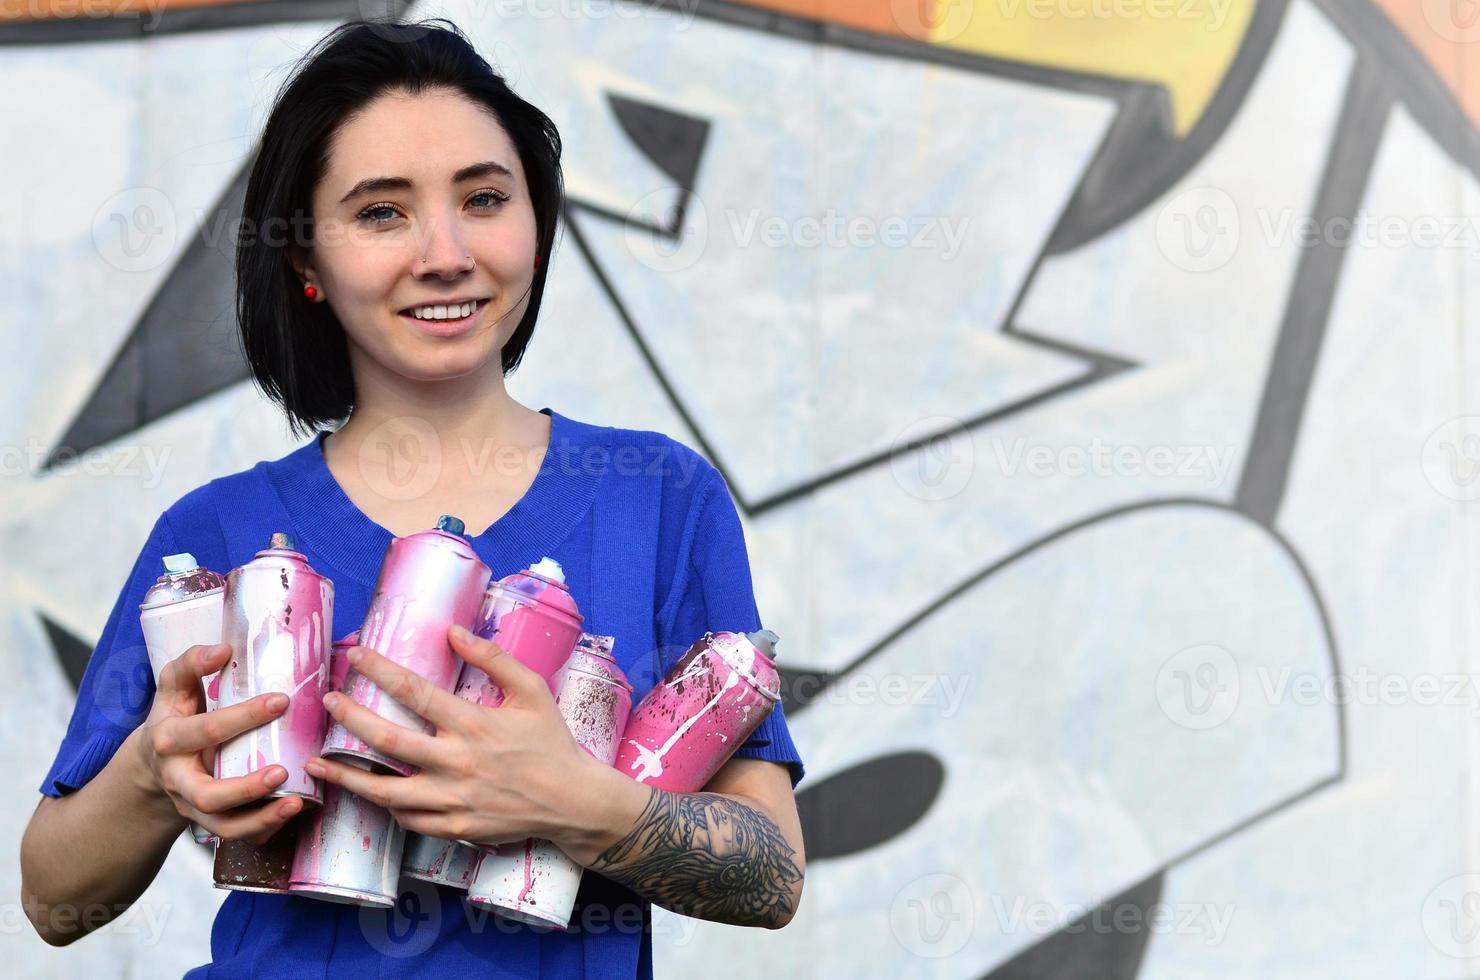 Portrait of an emotional young girl with black hair and piercings. Photo of a girl with aerosol paint cans in hands on a graffiti wall background. The concept of street art and use of aerosol paints